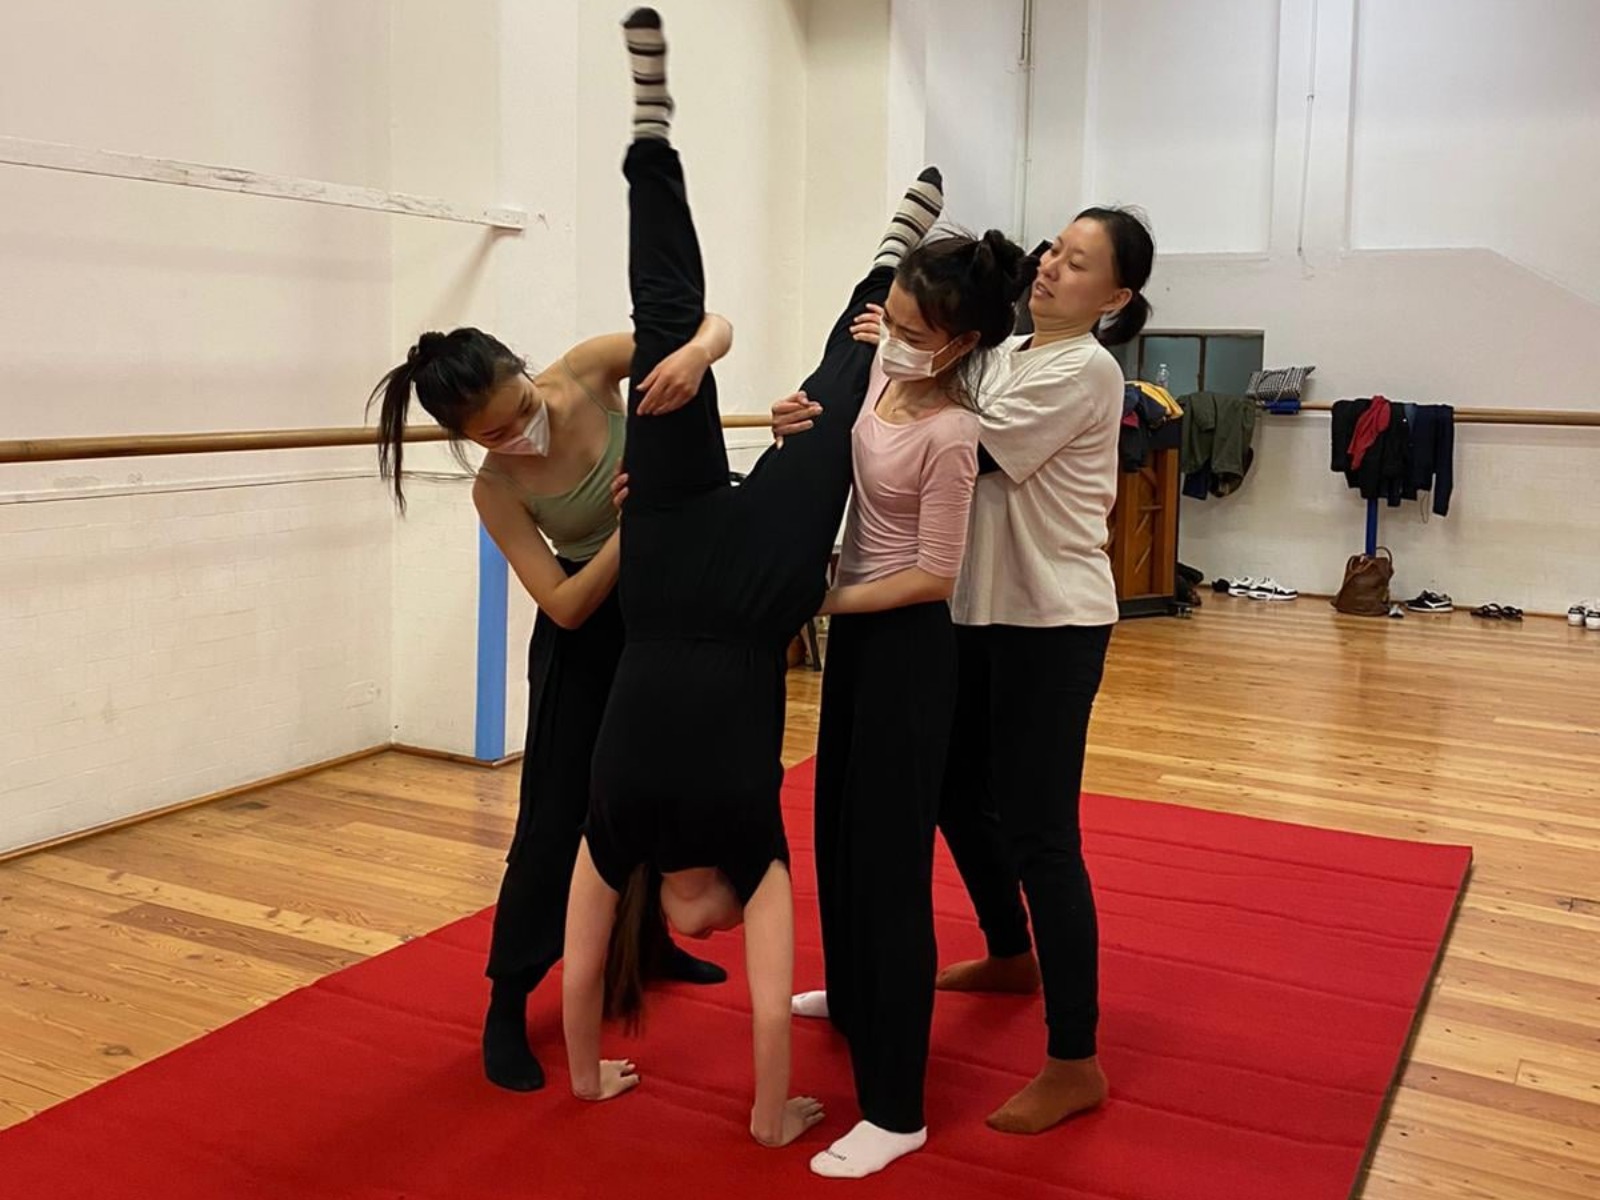 Three Palestine Circus School students guide a classmate to a handstand